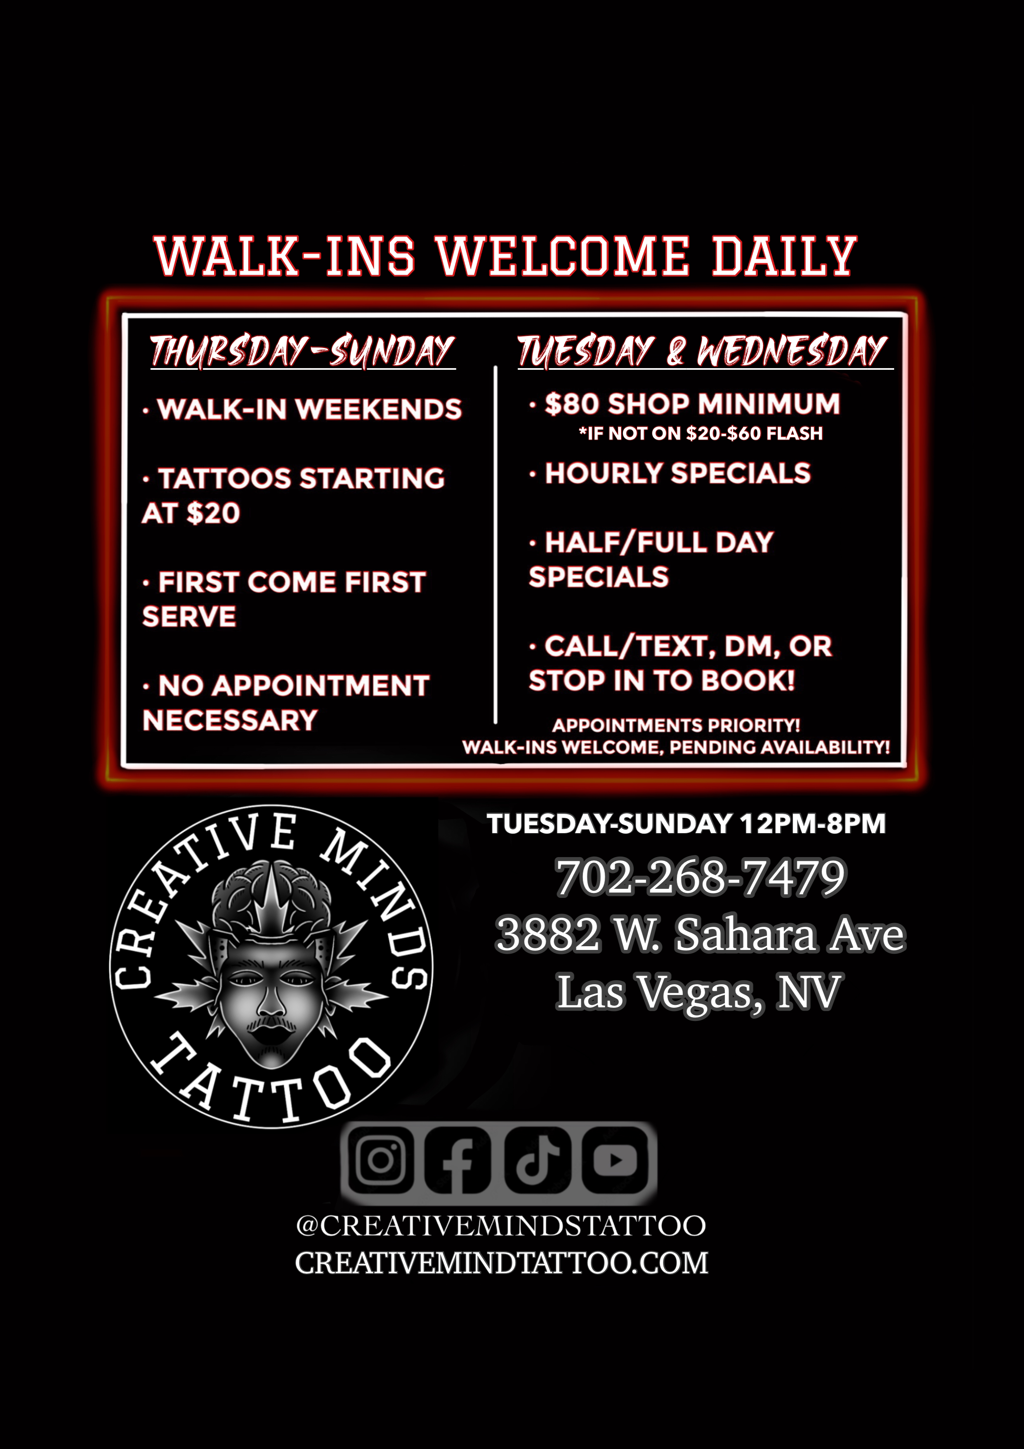 Location, hours and specials we have at Creative Minds Tattoo